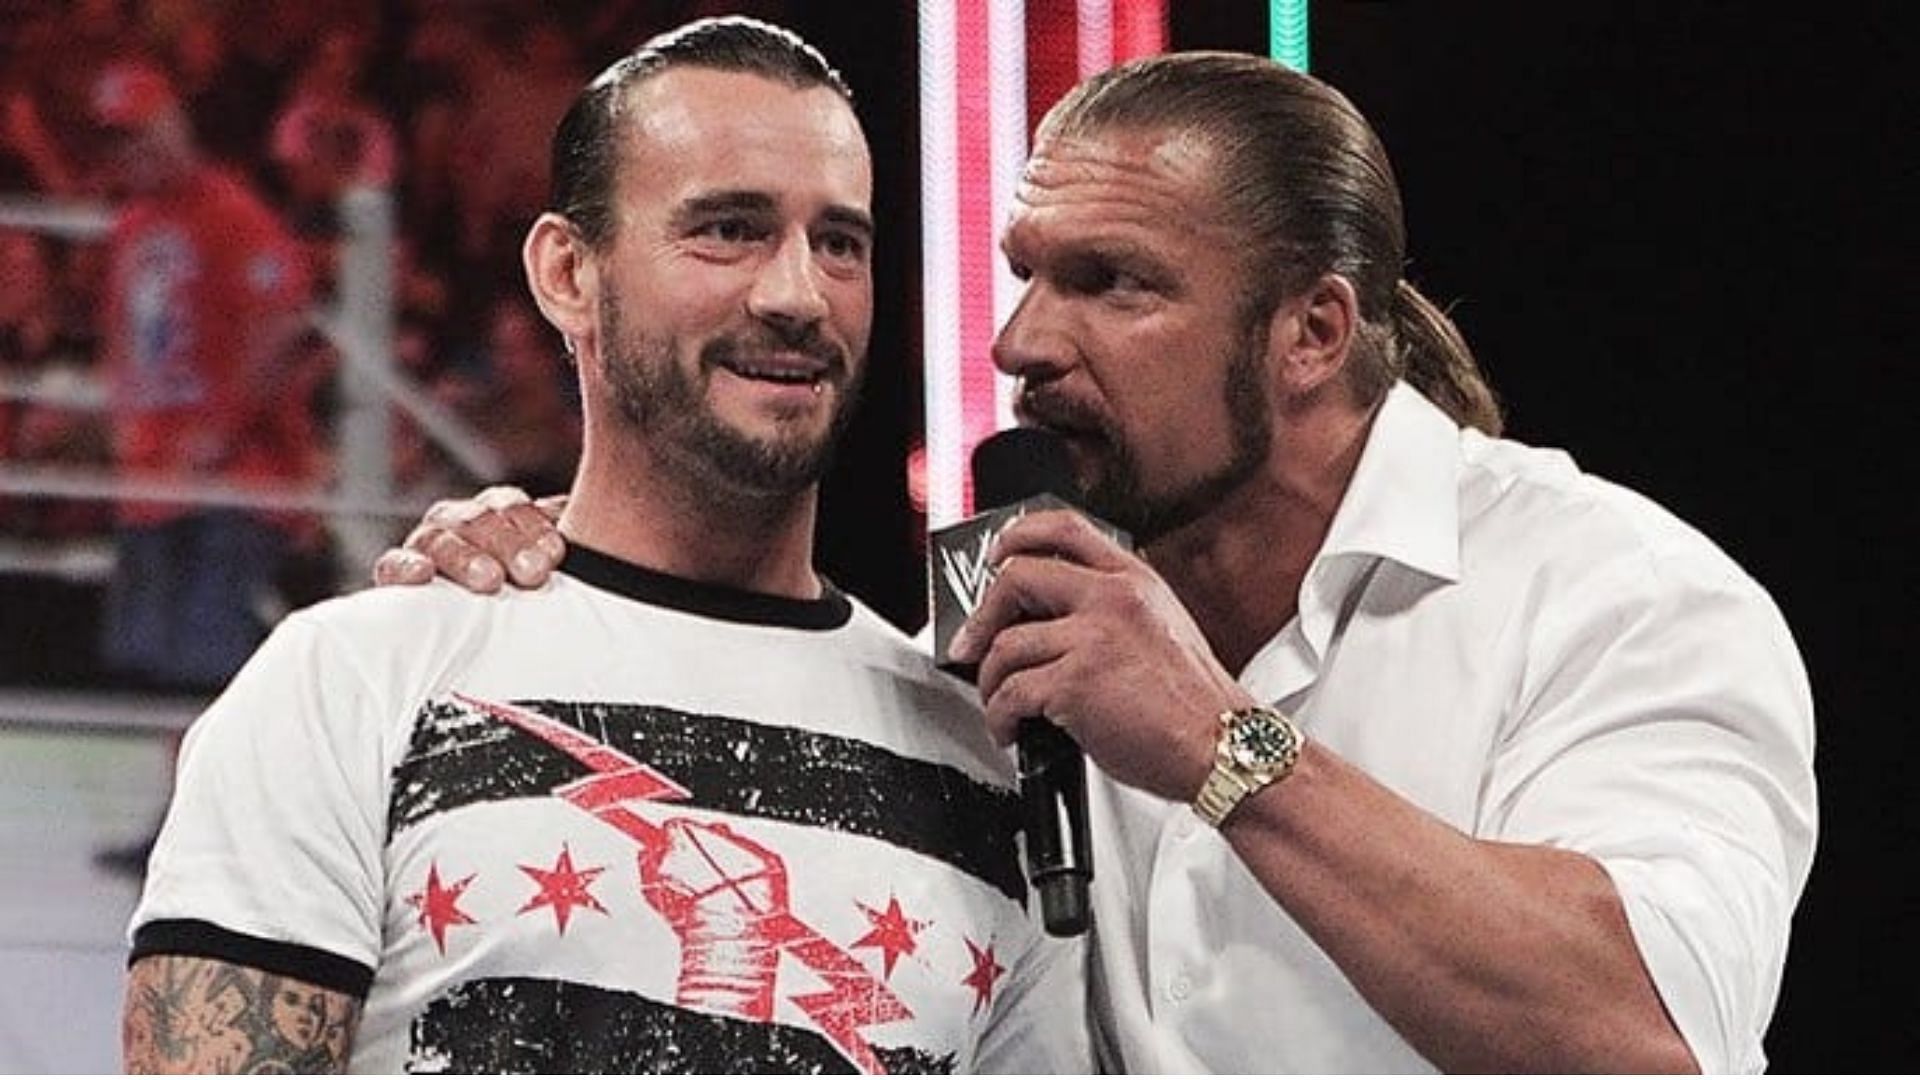 Could Triple H still somehow bring CM Punk back into WWE?